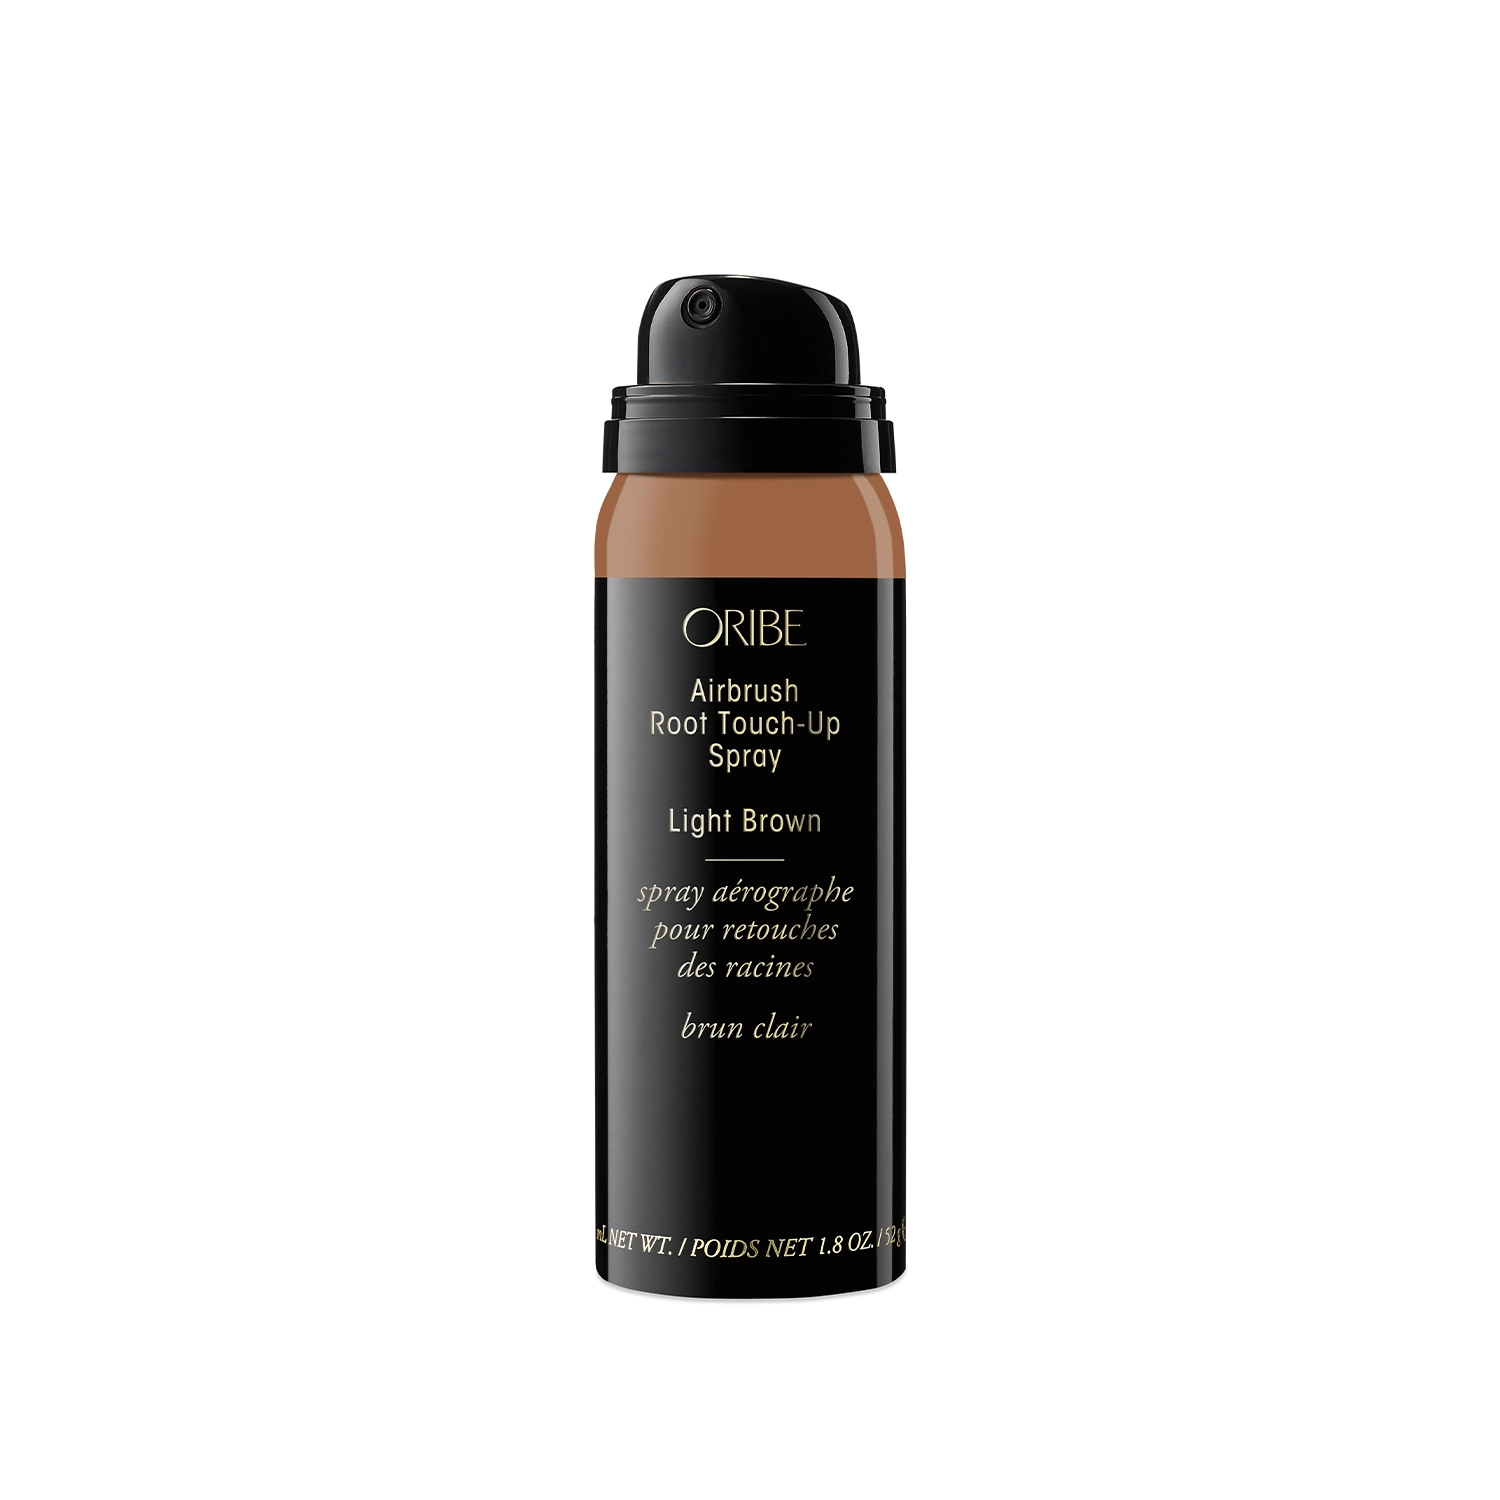 ORIBE - Airbrush spray for touch-up of regrowth (75ml)